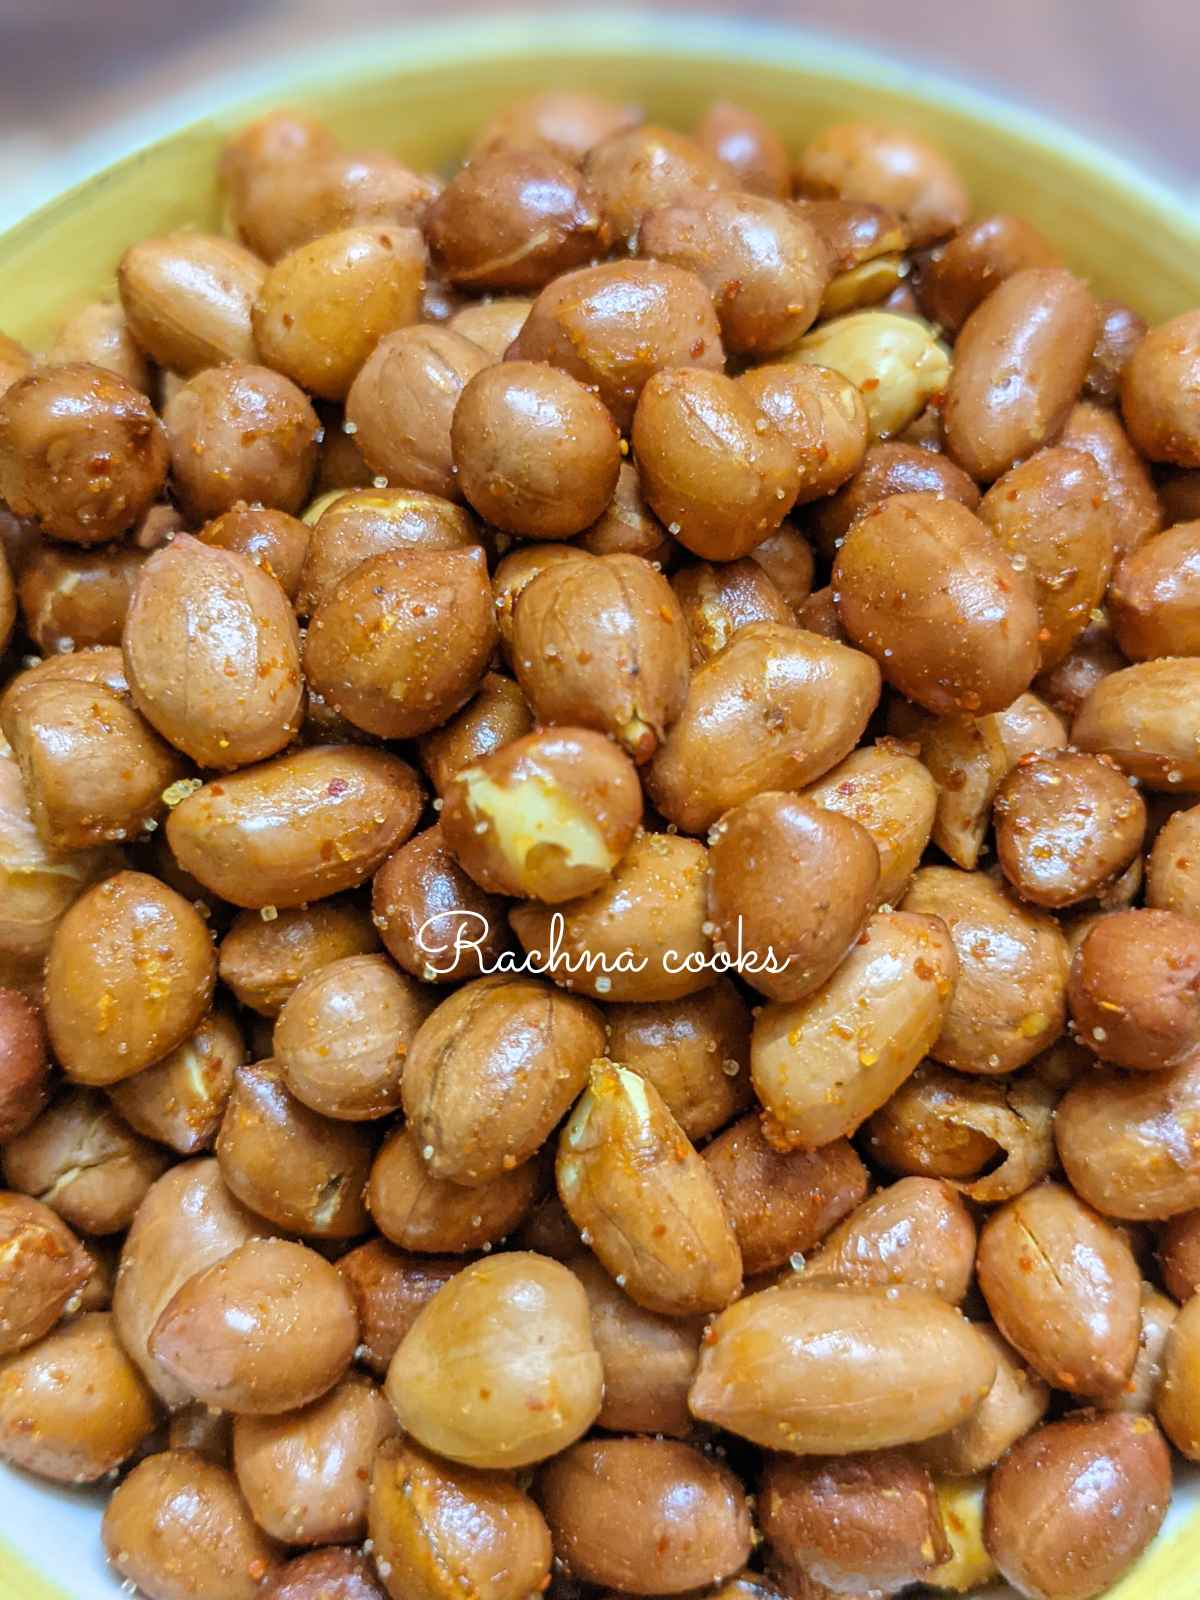 Close up of roasted air fried peanuts with spices.